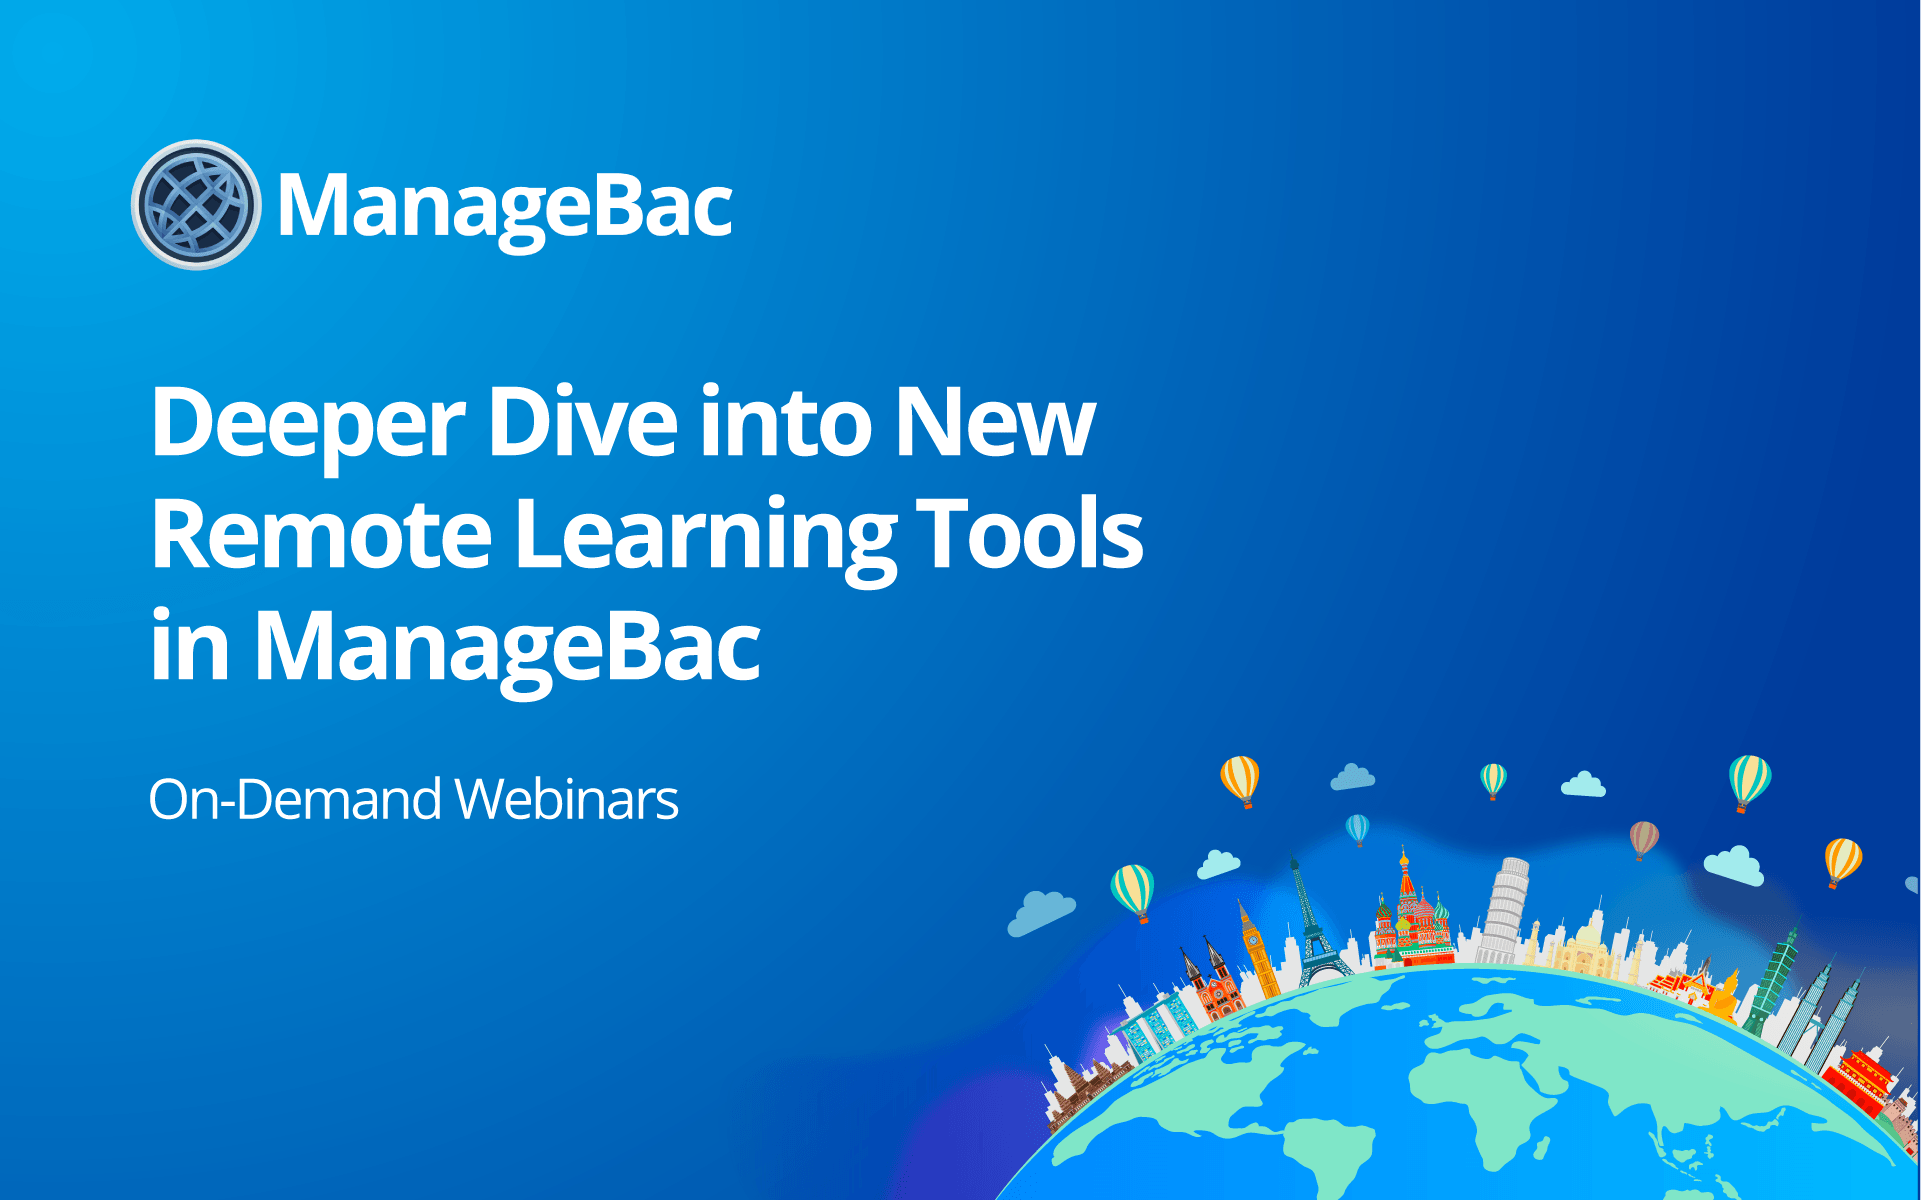 Deeper Dive into New Remote Learning Tools in ManageBac